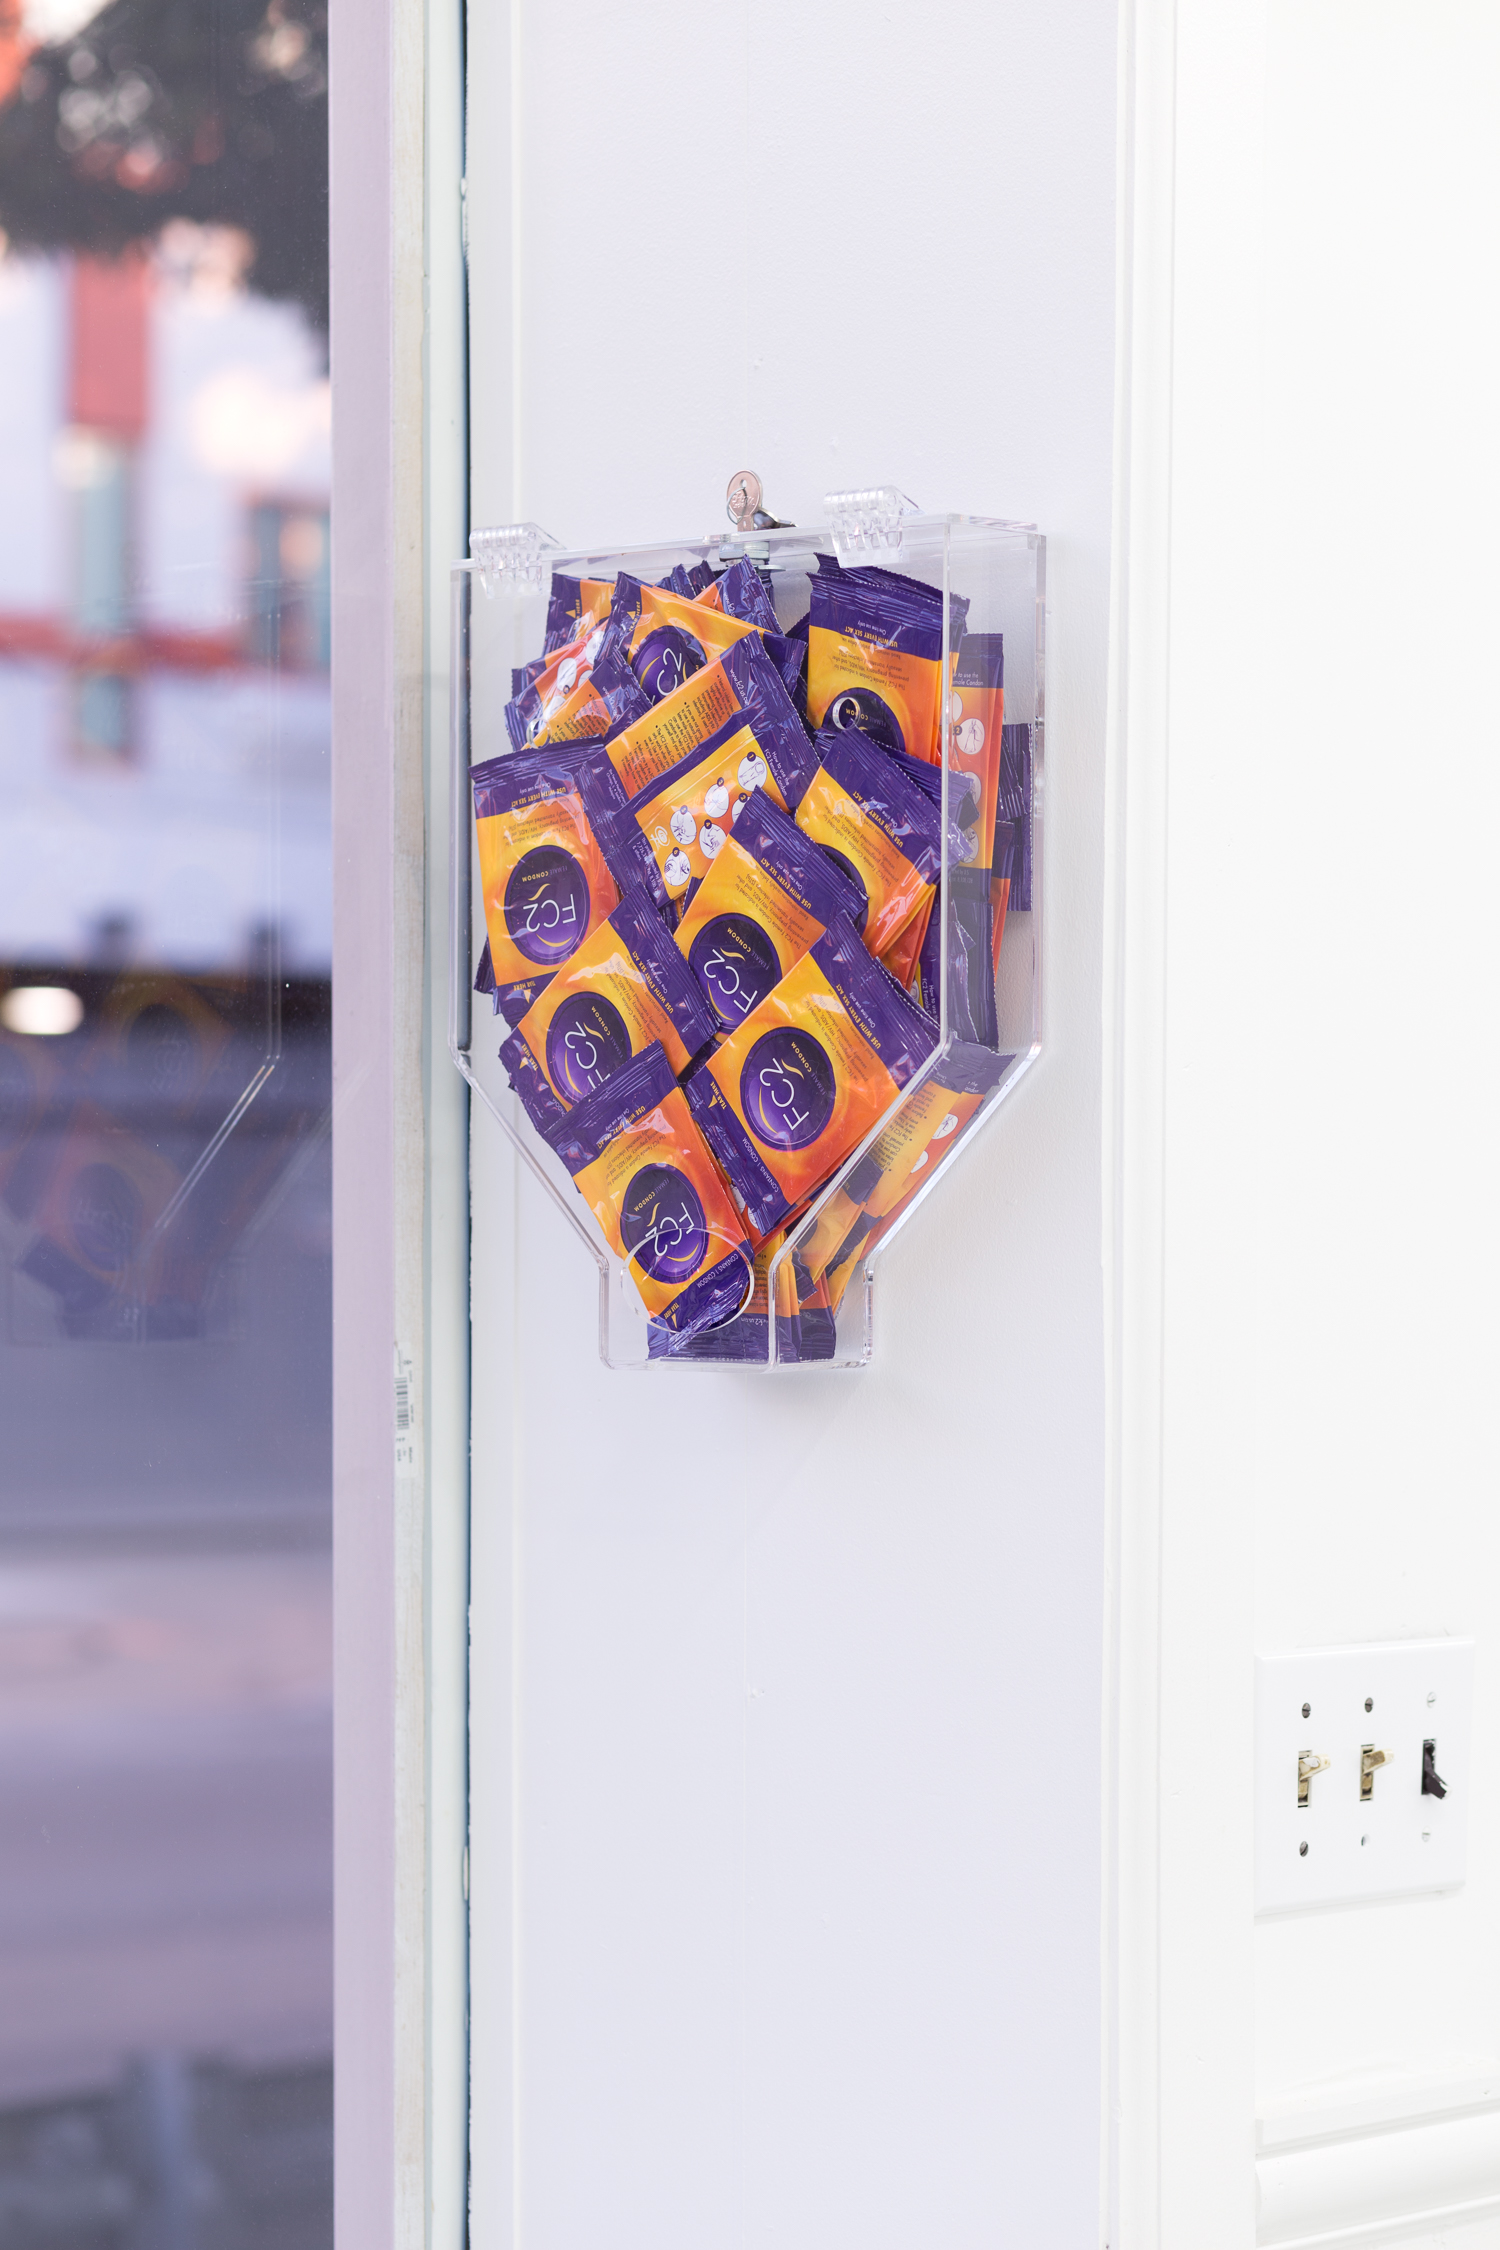 A condom dispenser is affixed to the wall